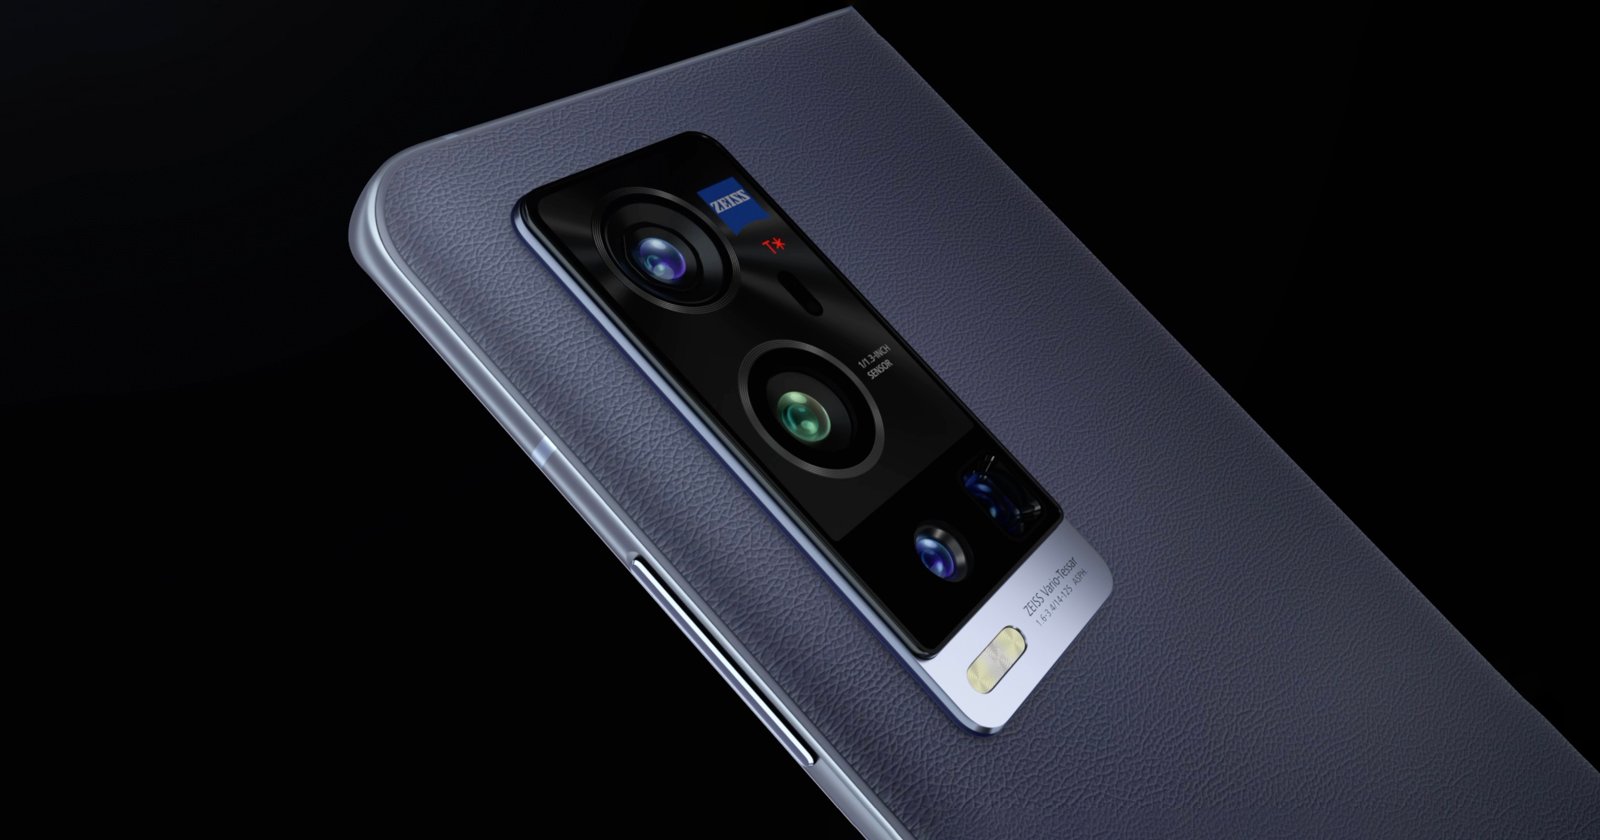 The Vivo X60 Pro Plus smartphone has a camera developed with Zeiss